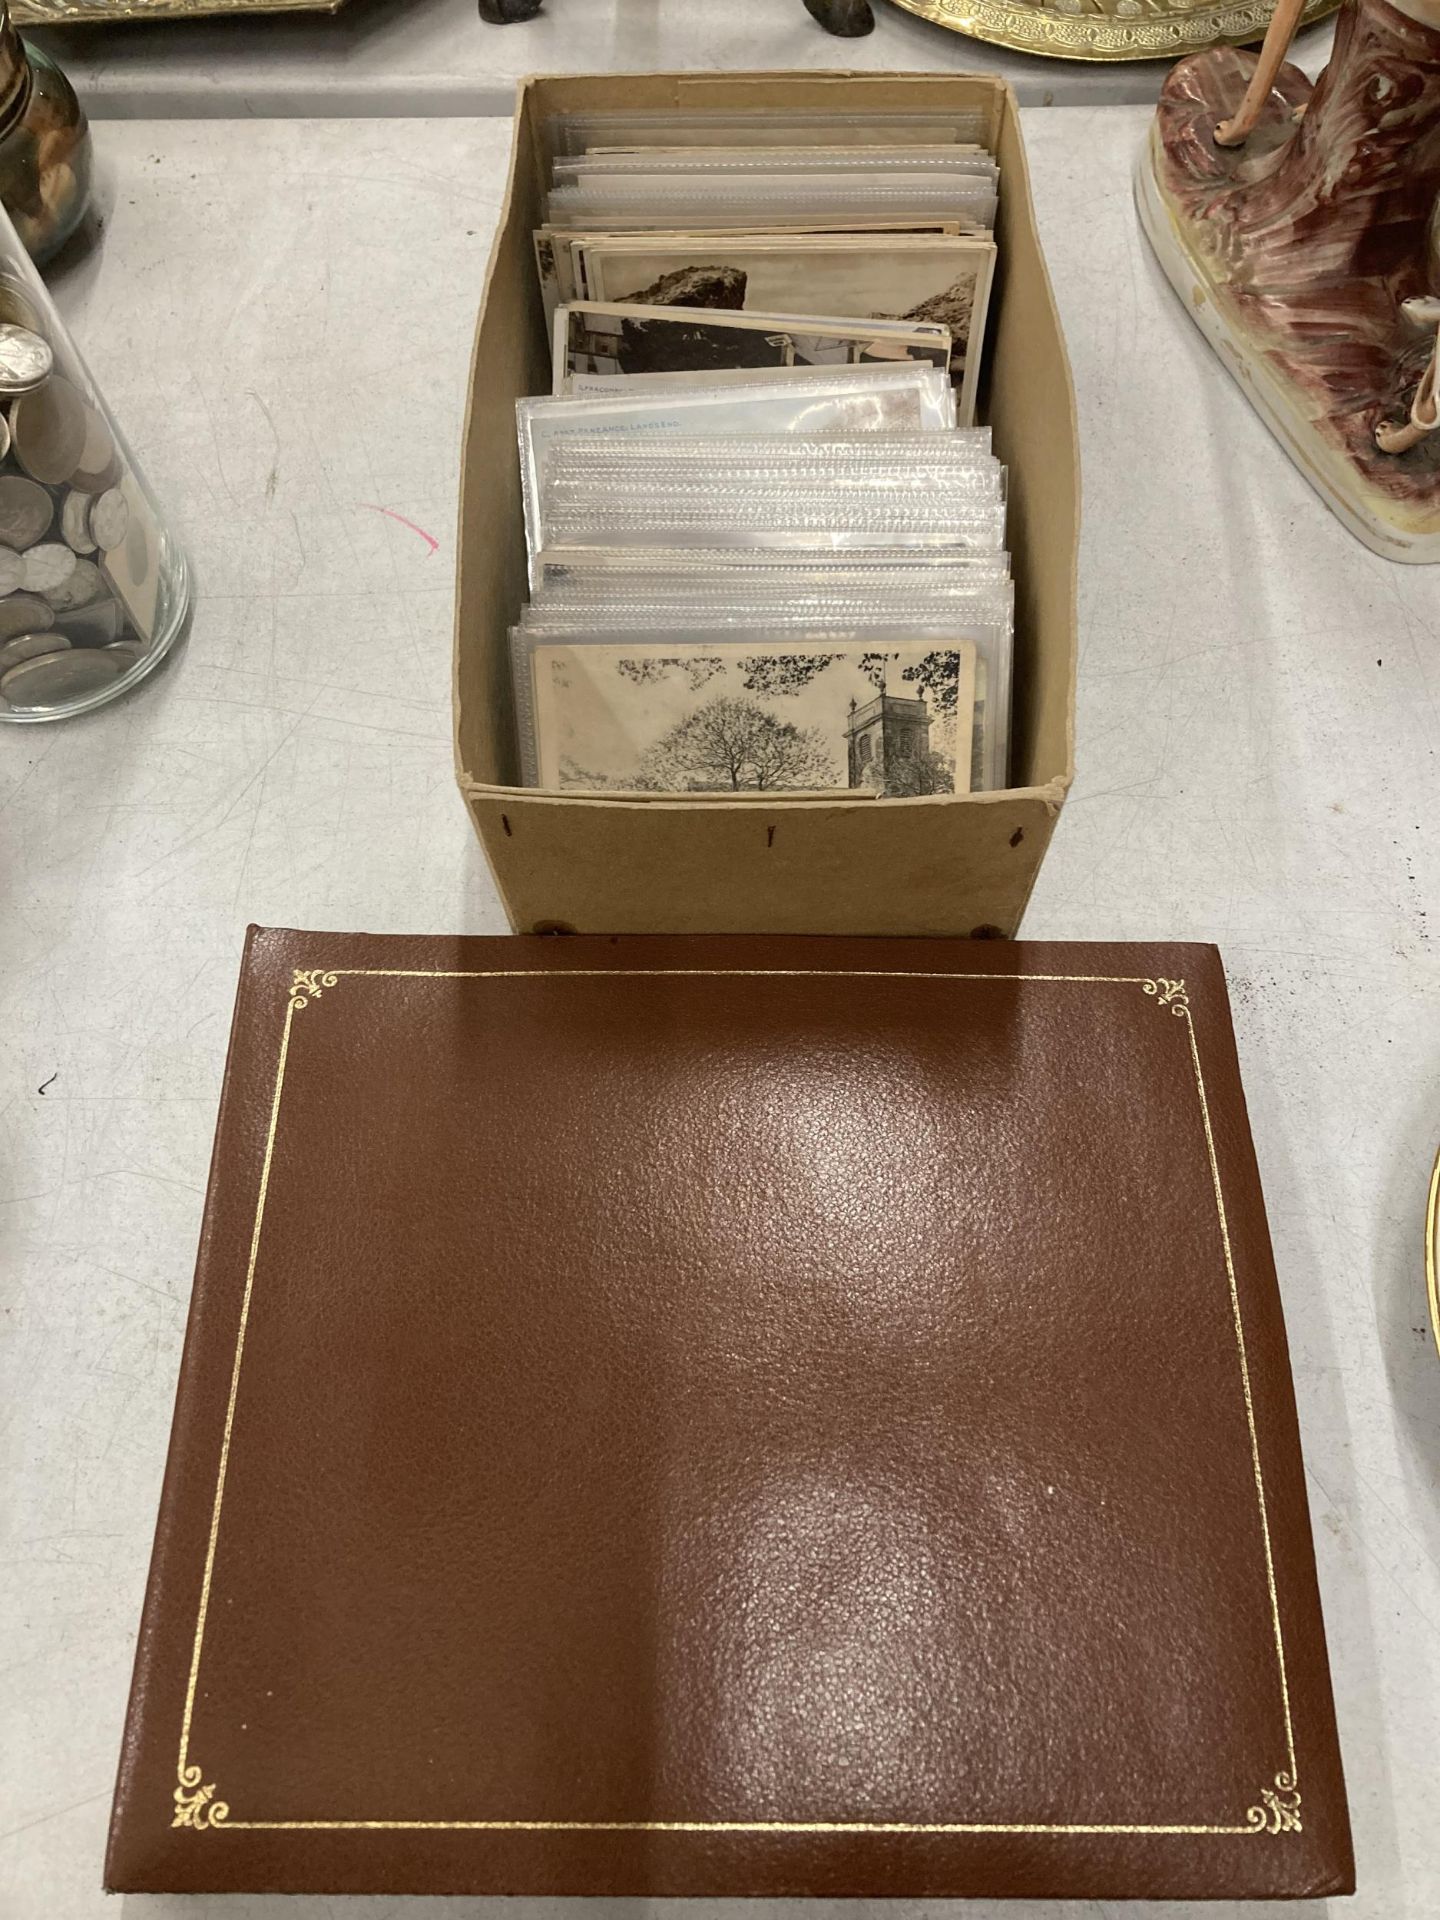 A POSTCARD ALBUM WITH POSTCARDS PLUS A LARGE QUANTITY OF LOOSE VINTAGE POSTCARDS IN PLASTIC SLEEVES